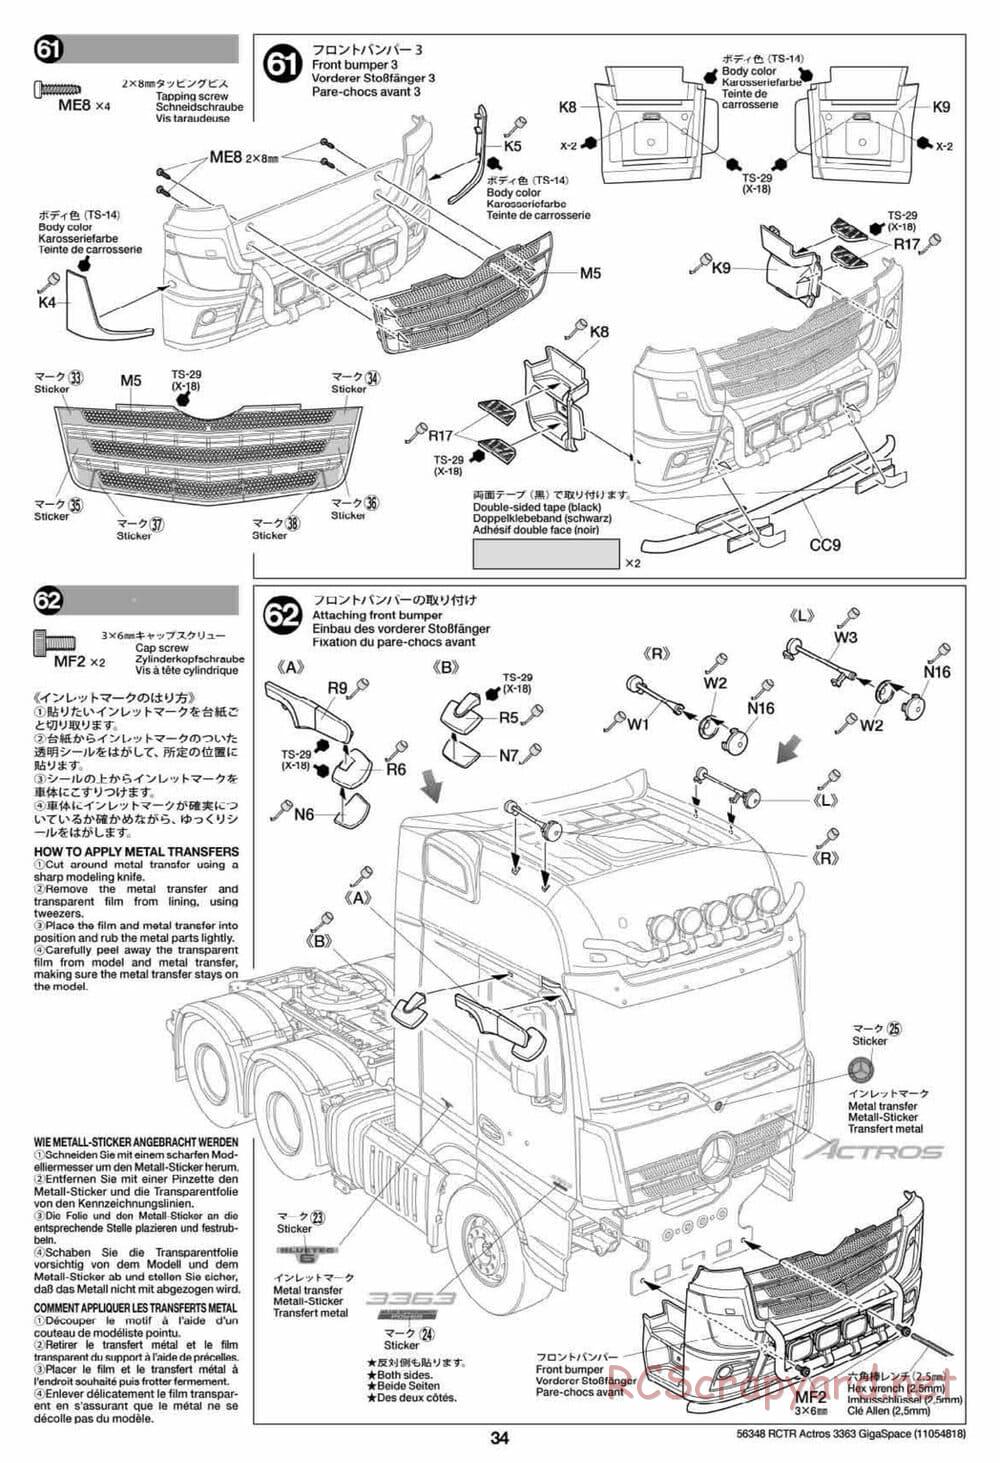 Tamiya - Mercedes-Benz Actros 3363 6x4 GigaSpace Tractor Truck Chassis - Manual - Page 34